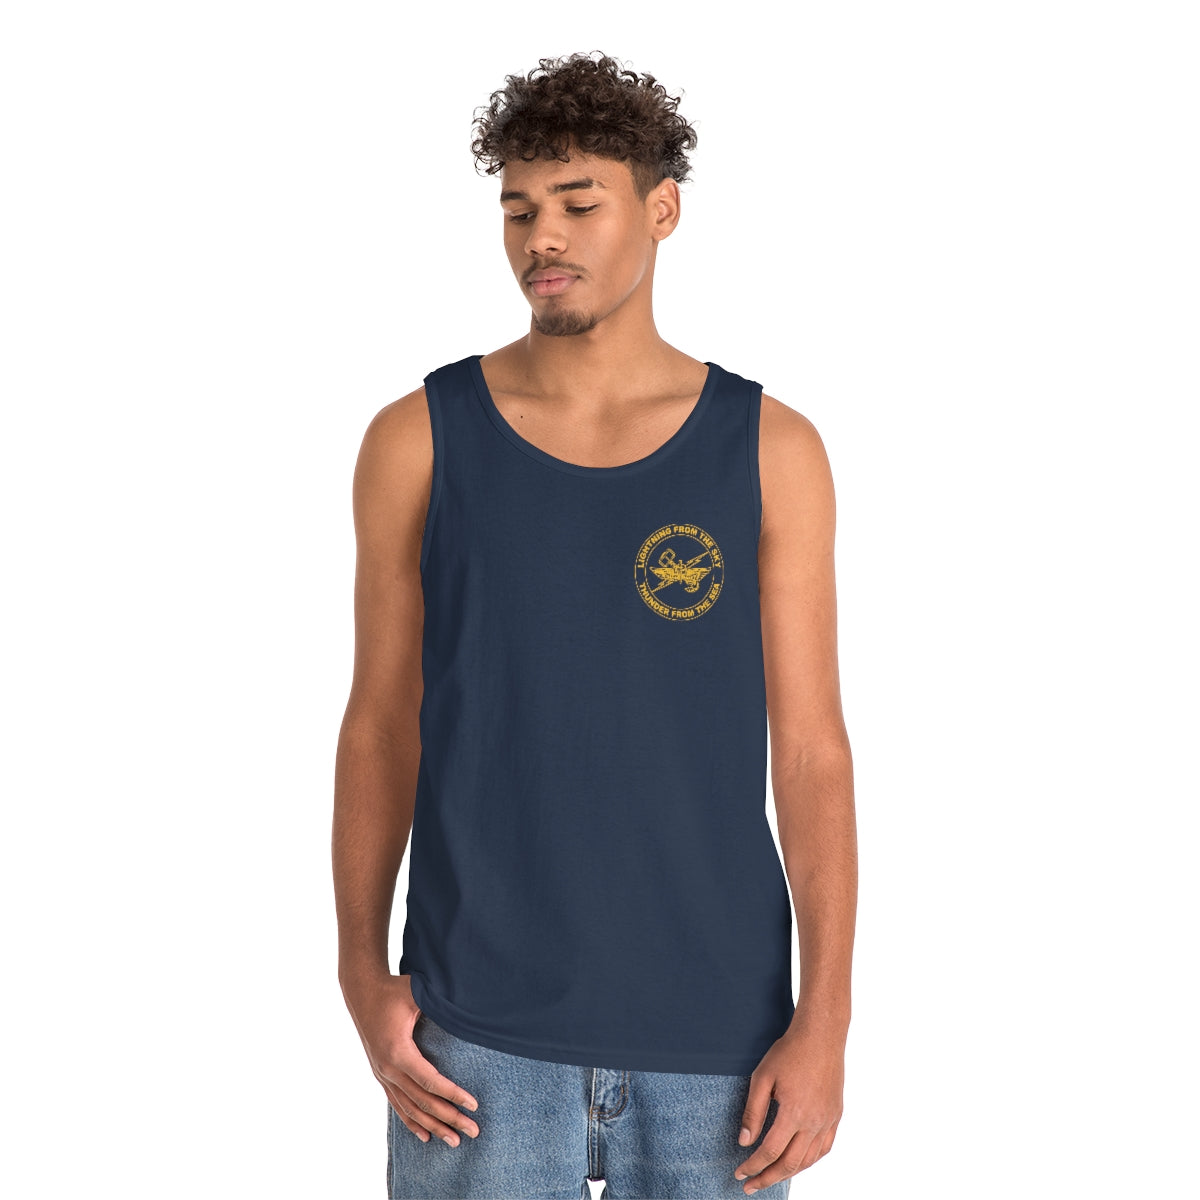 1st ANGLICO Tank Top